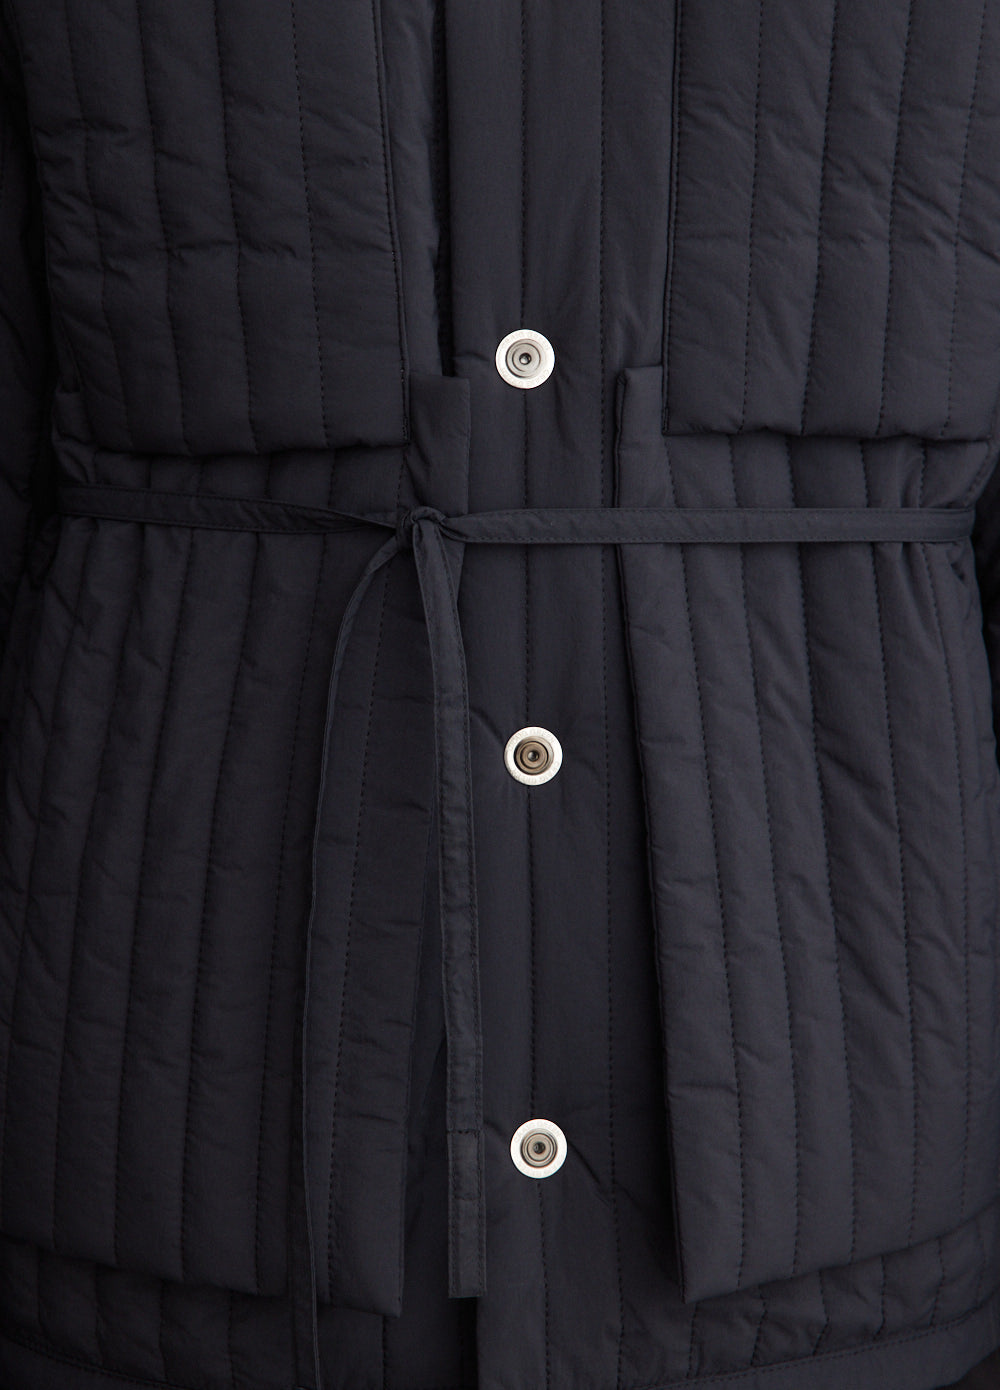 Quilted Worker Jacket